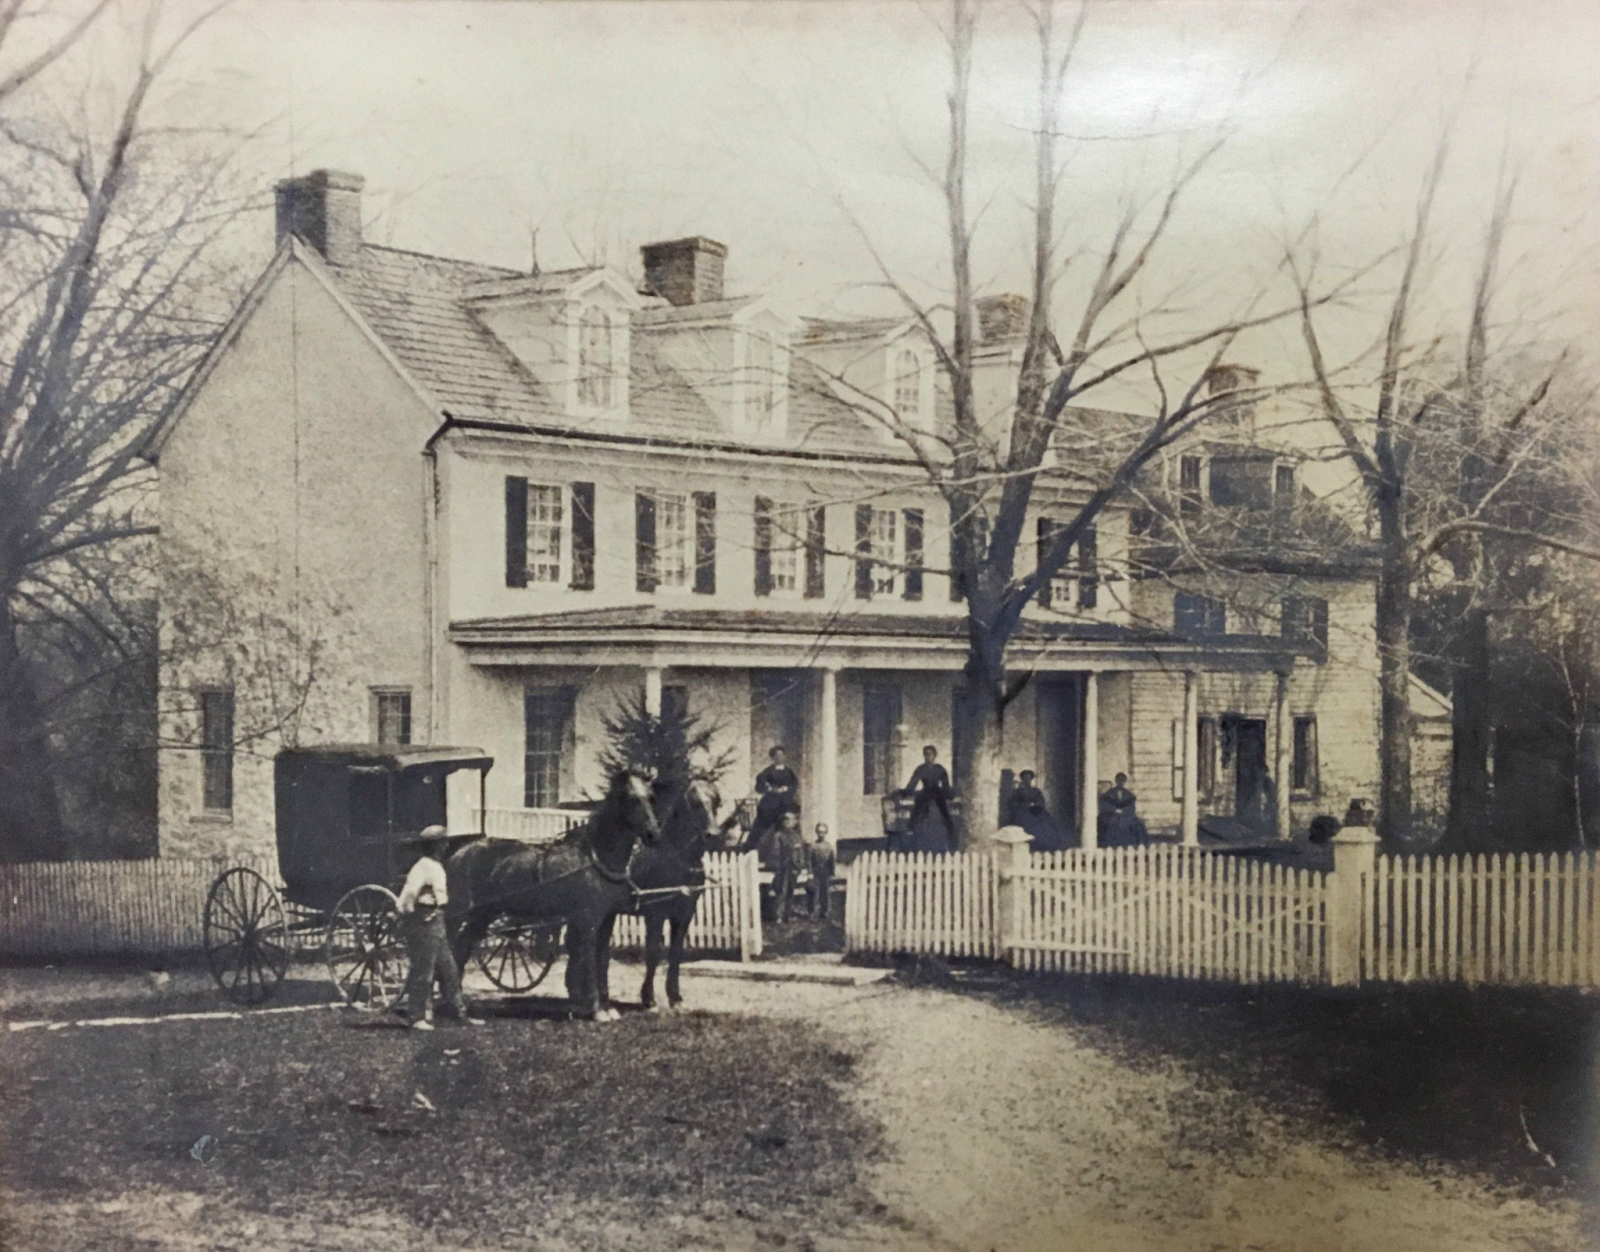 A black and white photo of the front of a British cottage with people and horses.